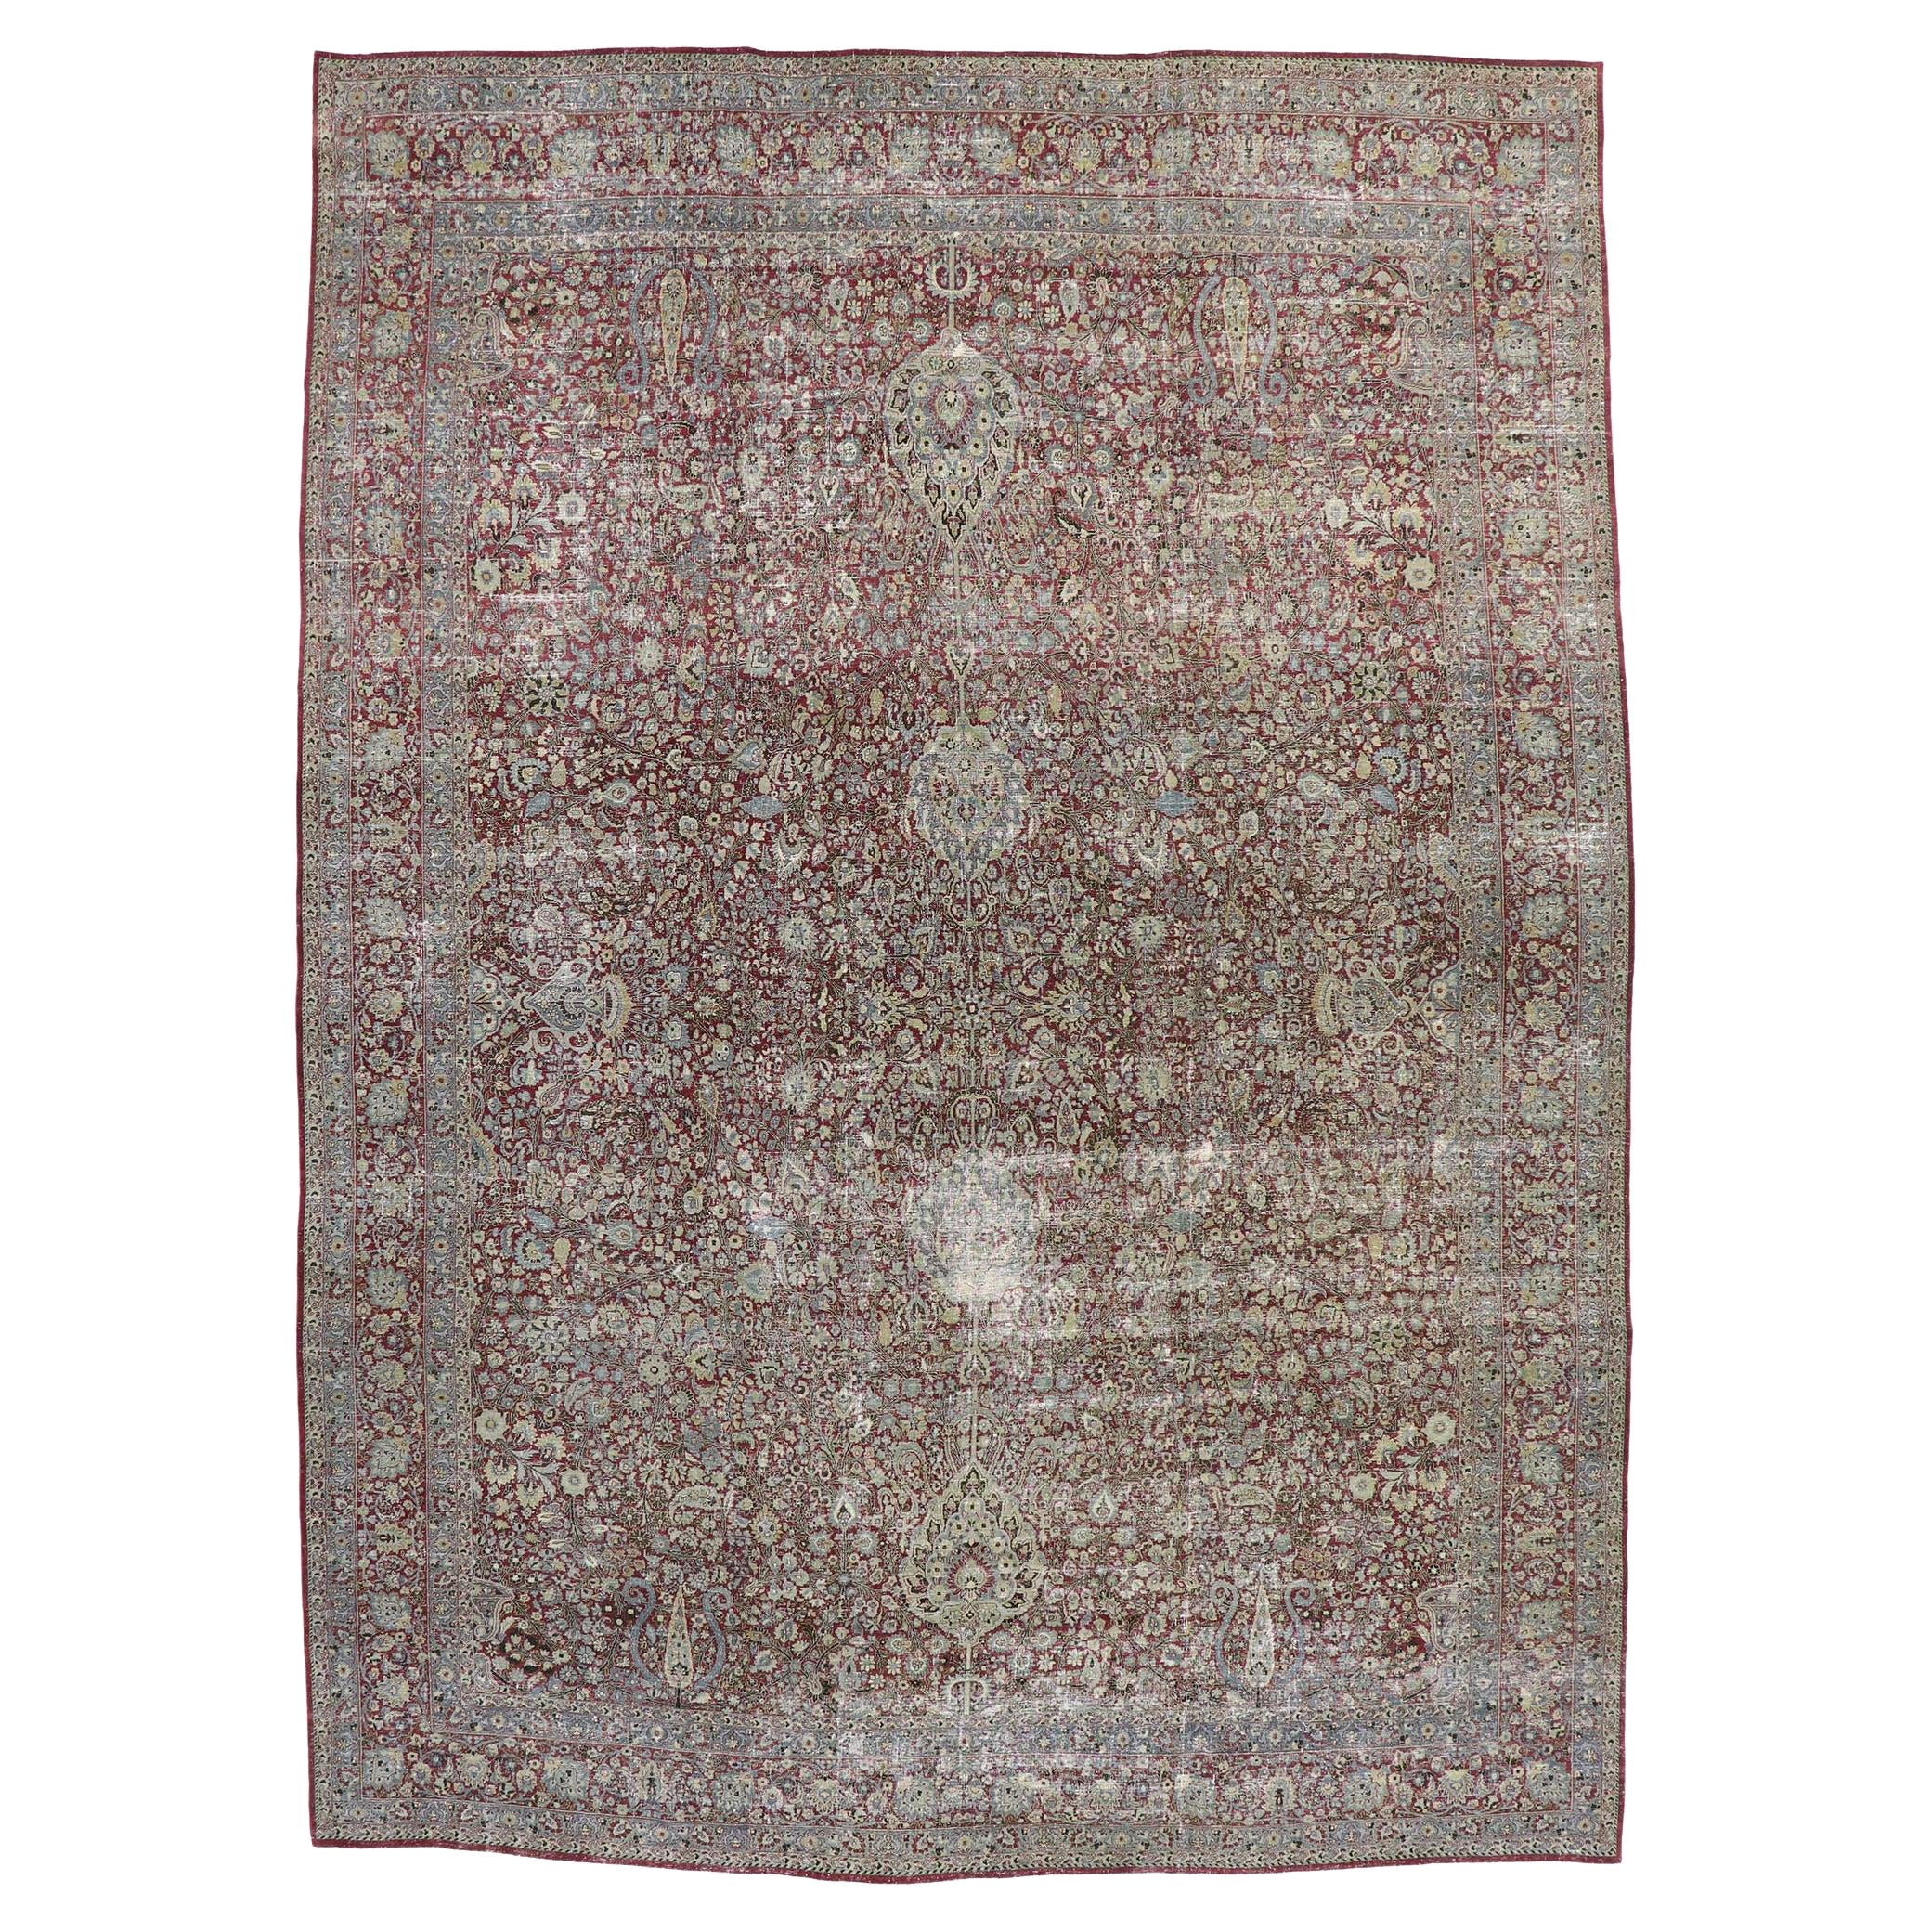 Distressed Antique Persian Kerman Rug, Laid-Back Luxury Meets Rugged Beauty